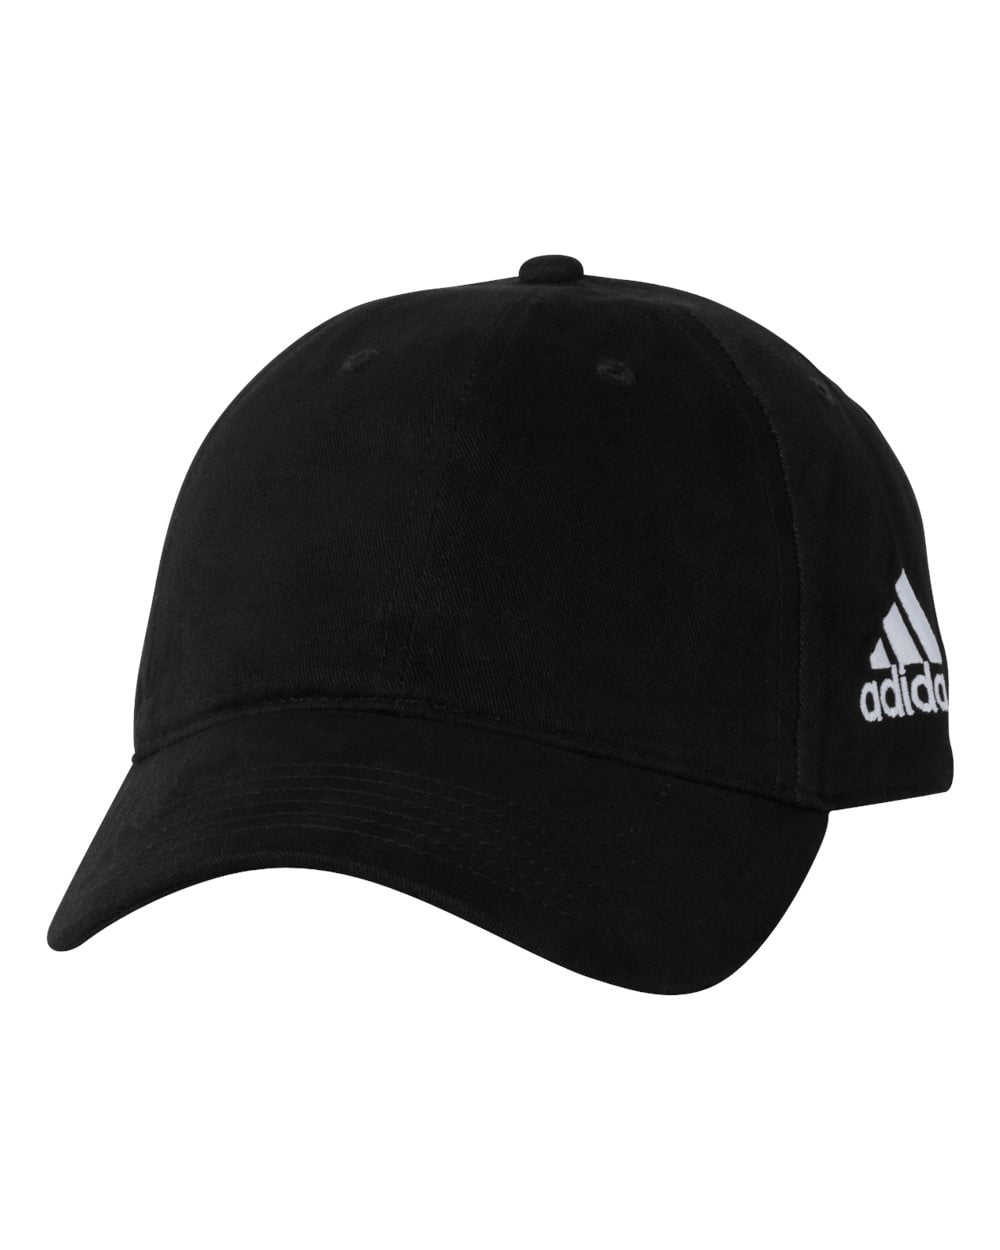 adidas core performance relaxed cap